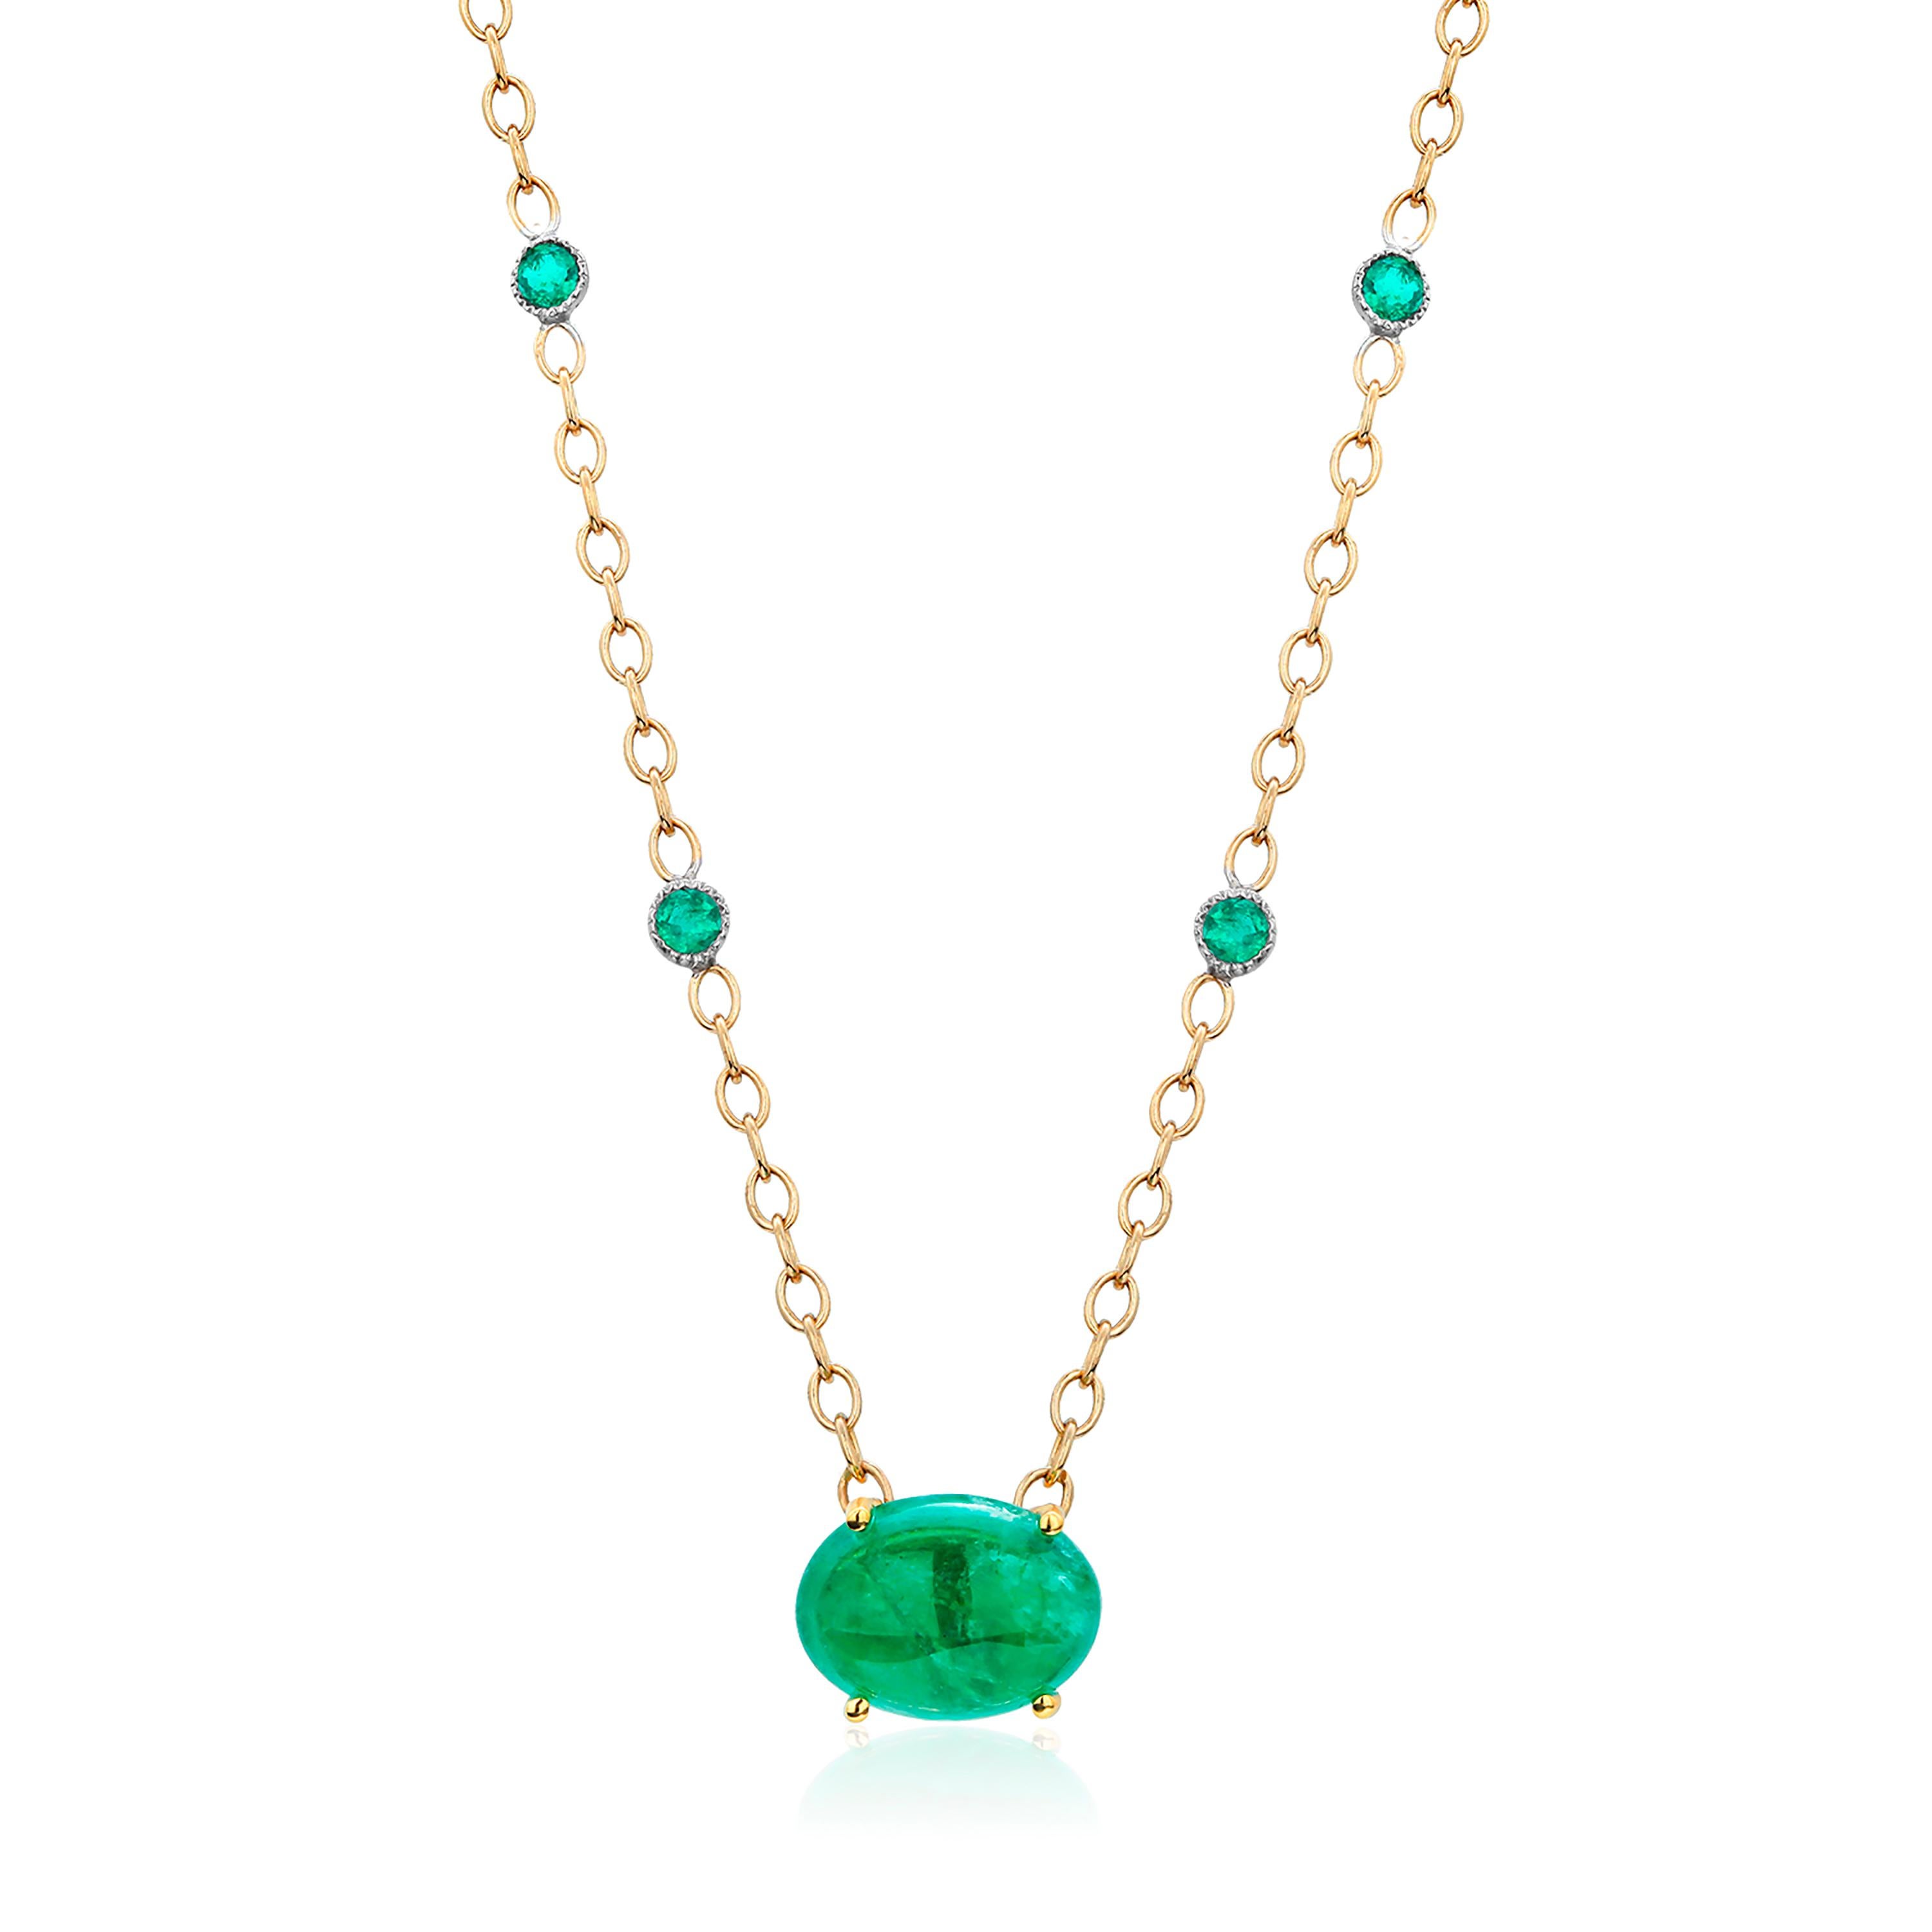 18 karats yellow gold necklace pendant with Colombia cabochon emerald
Necklace measuring 17 inch 
Colombia cabochon emerald weighing 6.46 carats
Four round matched emeralds weighing one carat
Emerald hue tone color is emerald grass green
Cable chain